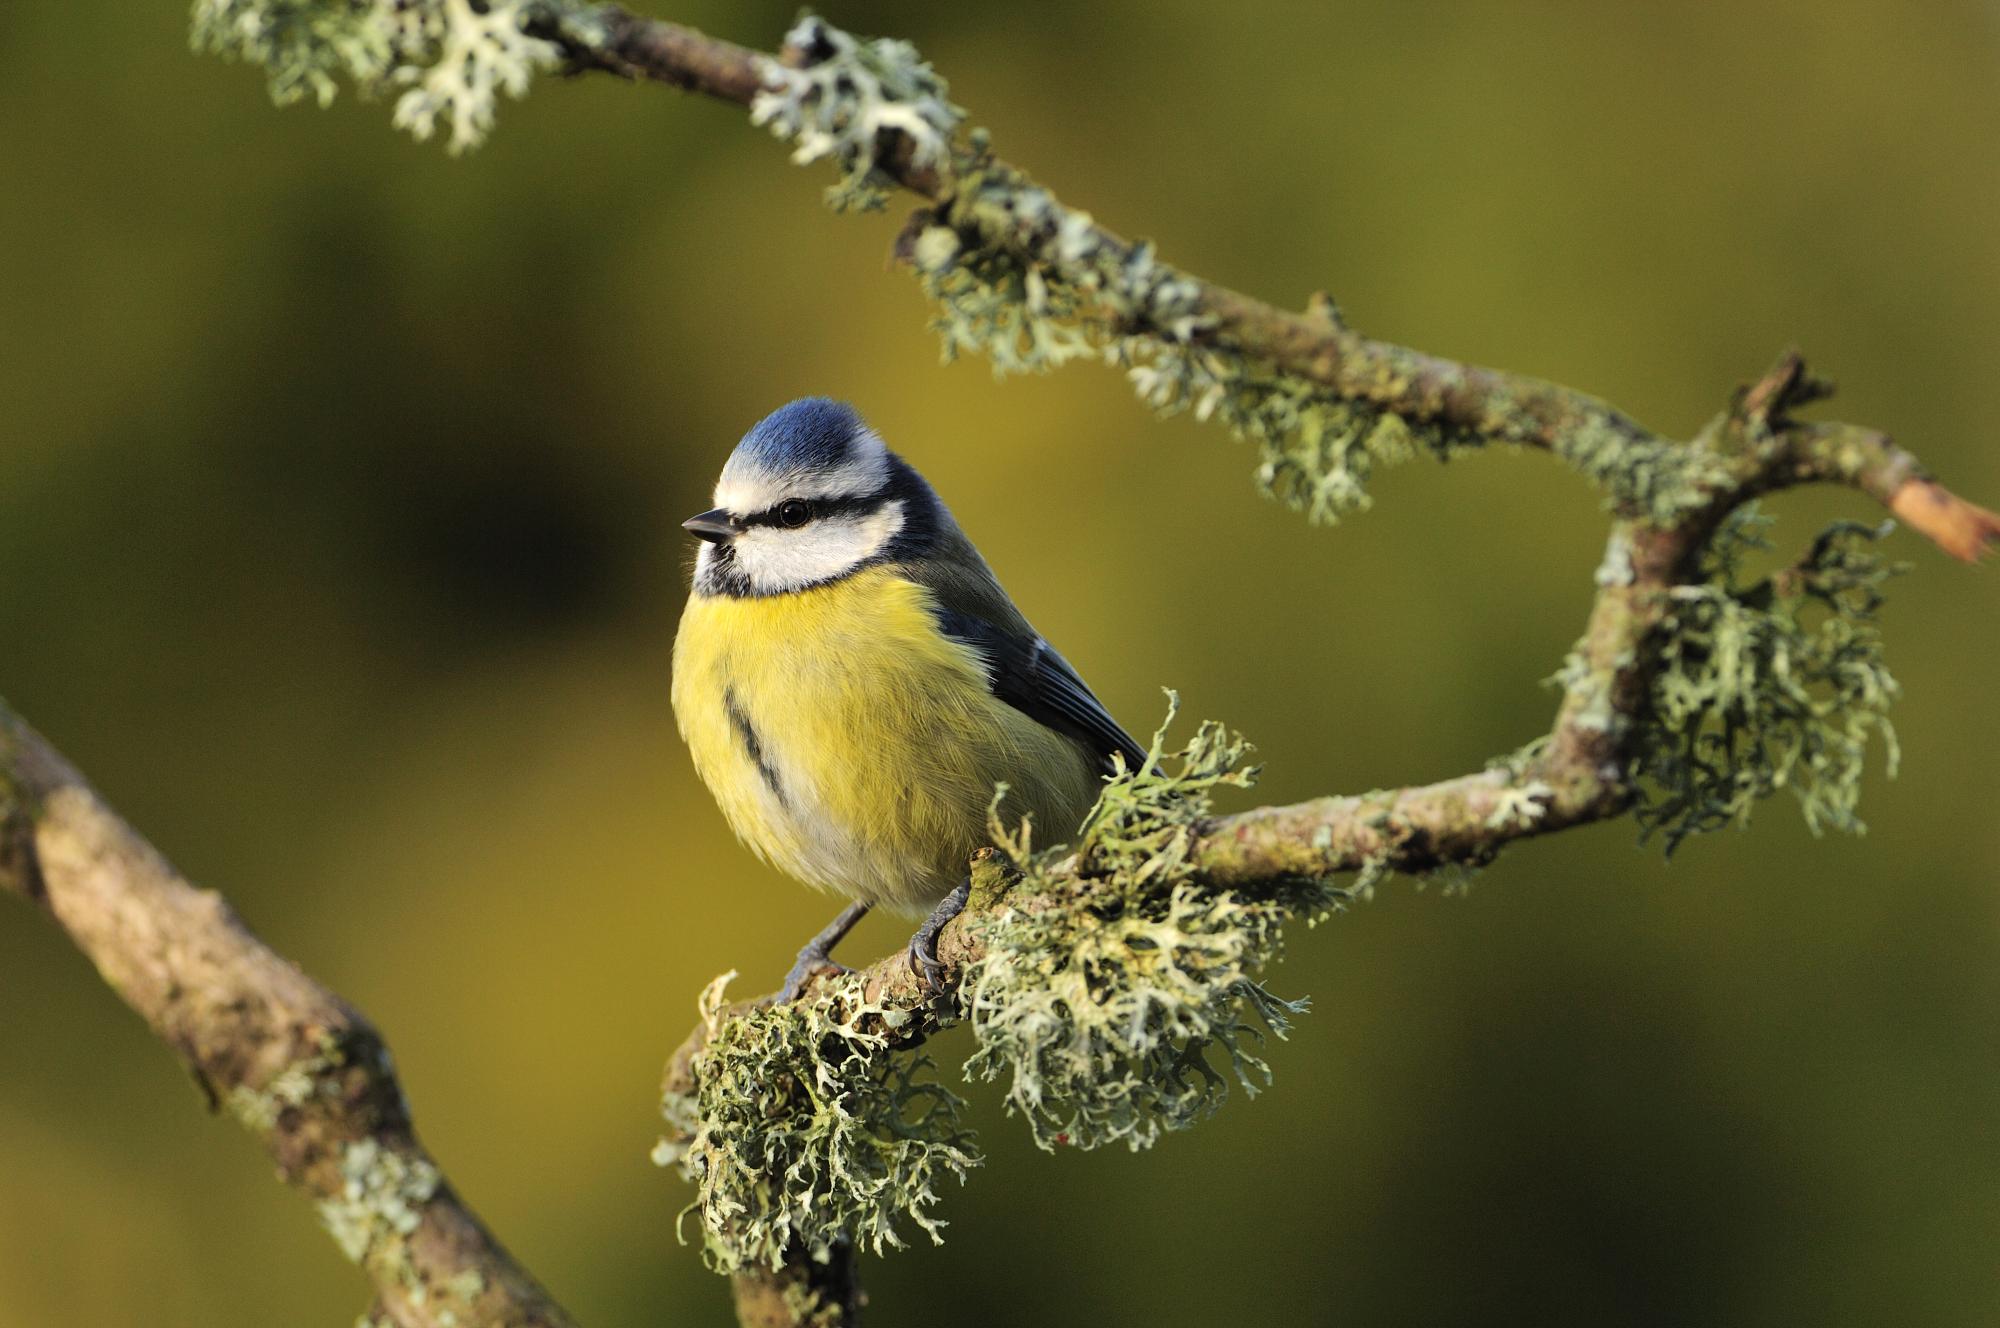 Blue tit (Cyanistes caeruleus) perching on a lichen covered branch. ©Lorne Gill/SNH. For information on reproduction rights contact the Scottish Natural Heritage Image Library on Tel. 01738 444177 or www.nature.scot